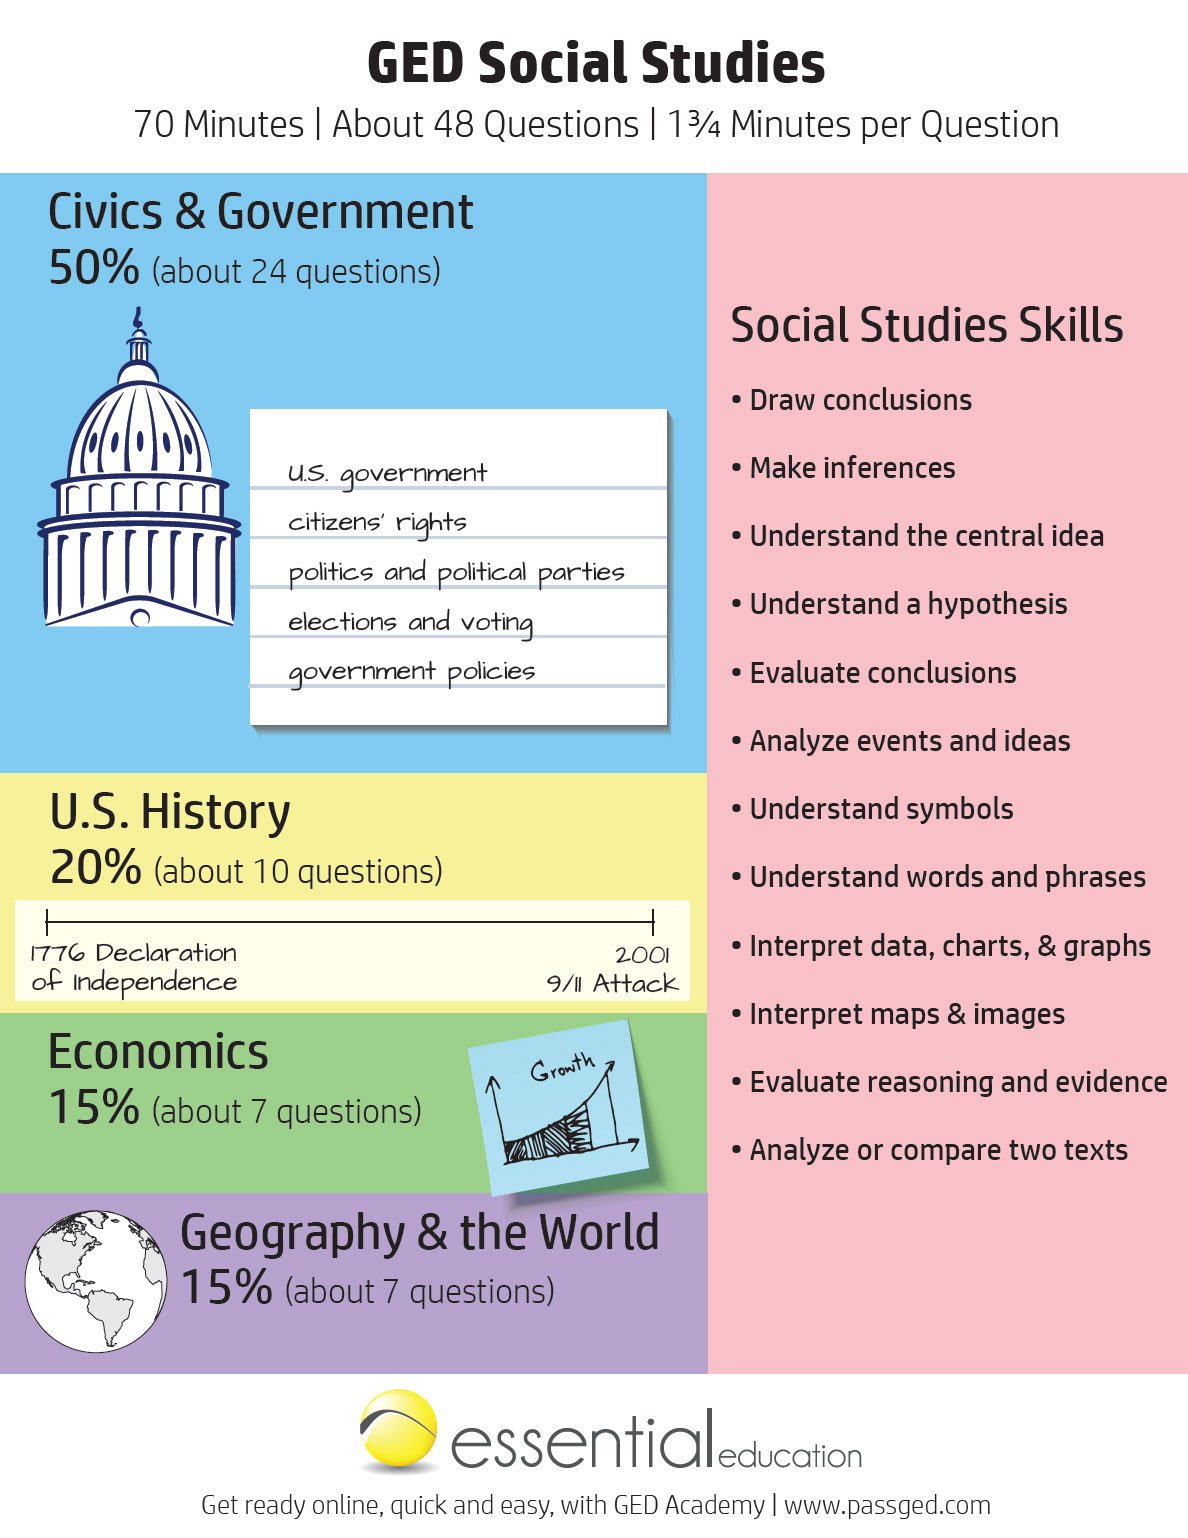 This GED social studies cheat sheet gives you all the basics you need to know about the test!